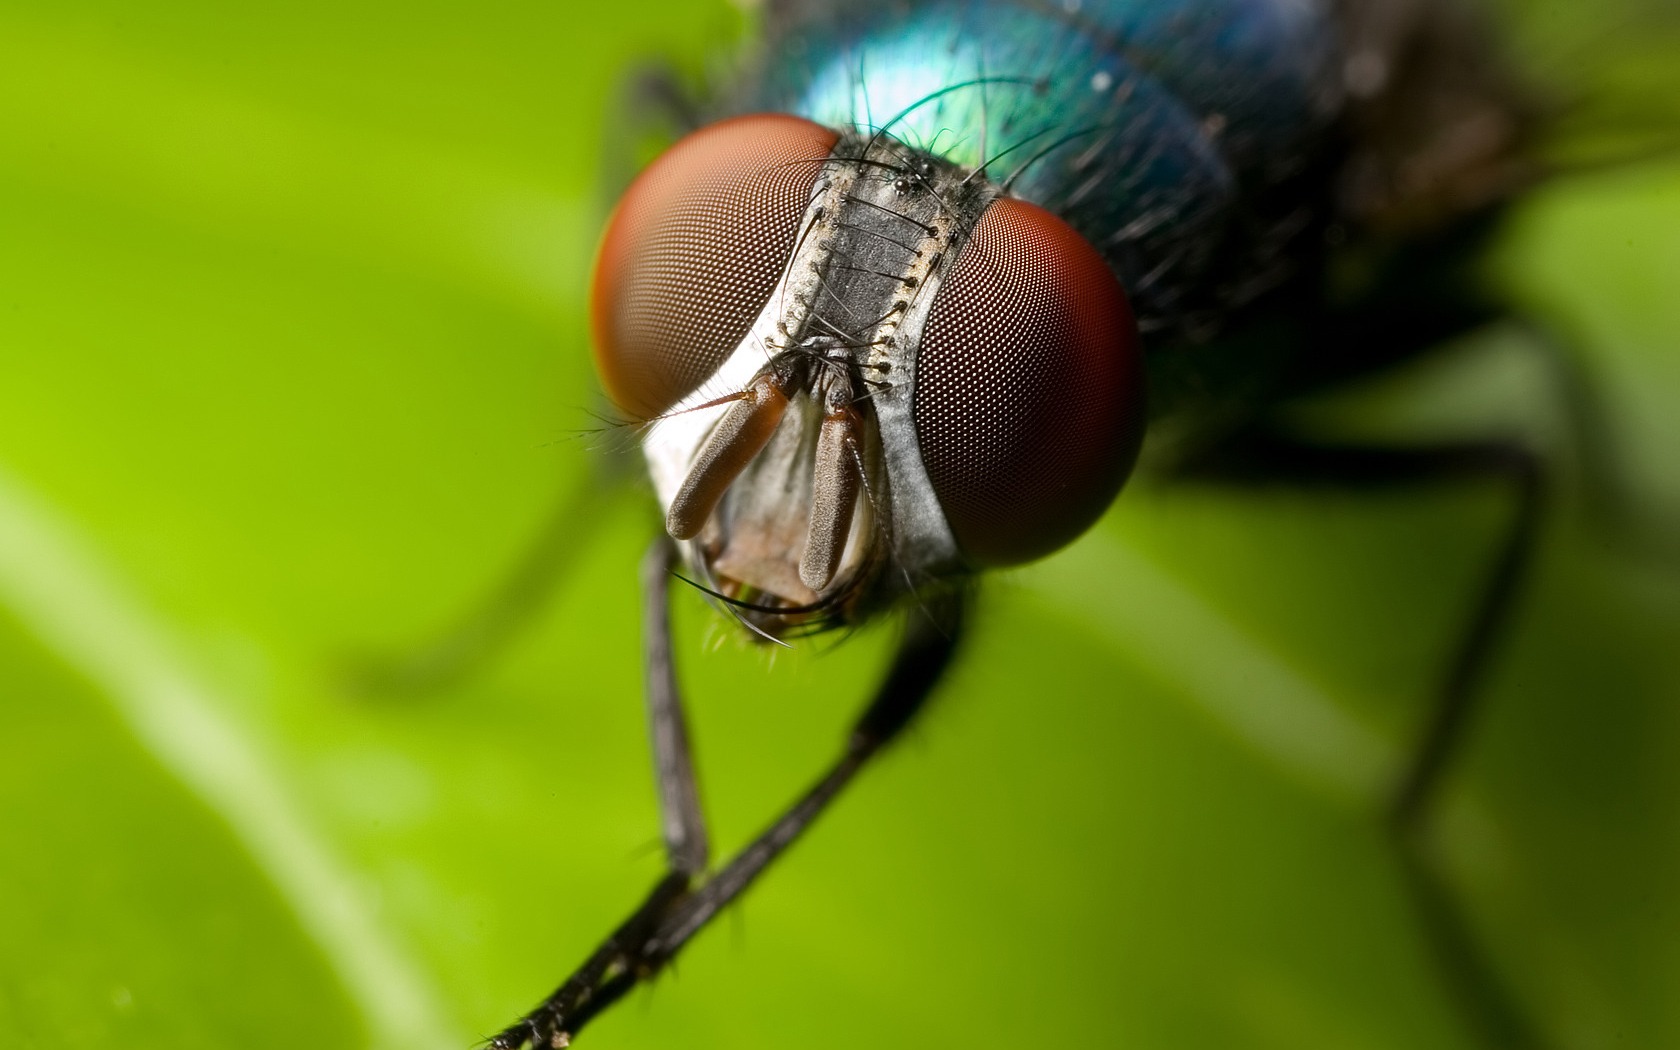 Houseflies do not have an average lifespan of 24 hours. They live between 20 to 30 days. Learn more on <a href="http://www.newton.dep.anl.gov/natbltn/400-499/nb453.htm" target="_blank">Newton.gov</a>.